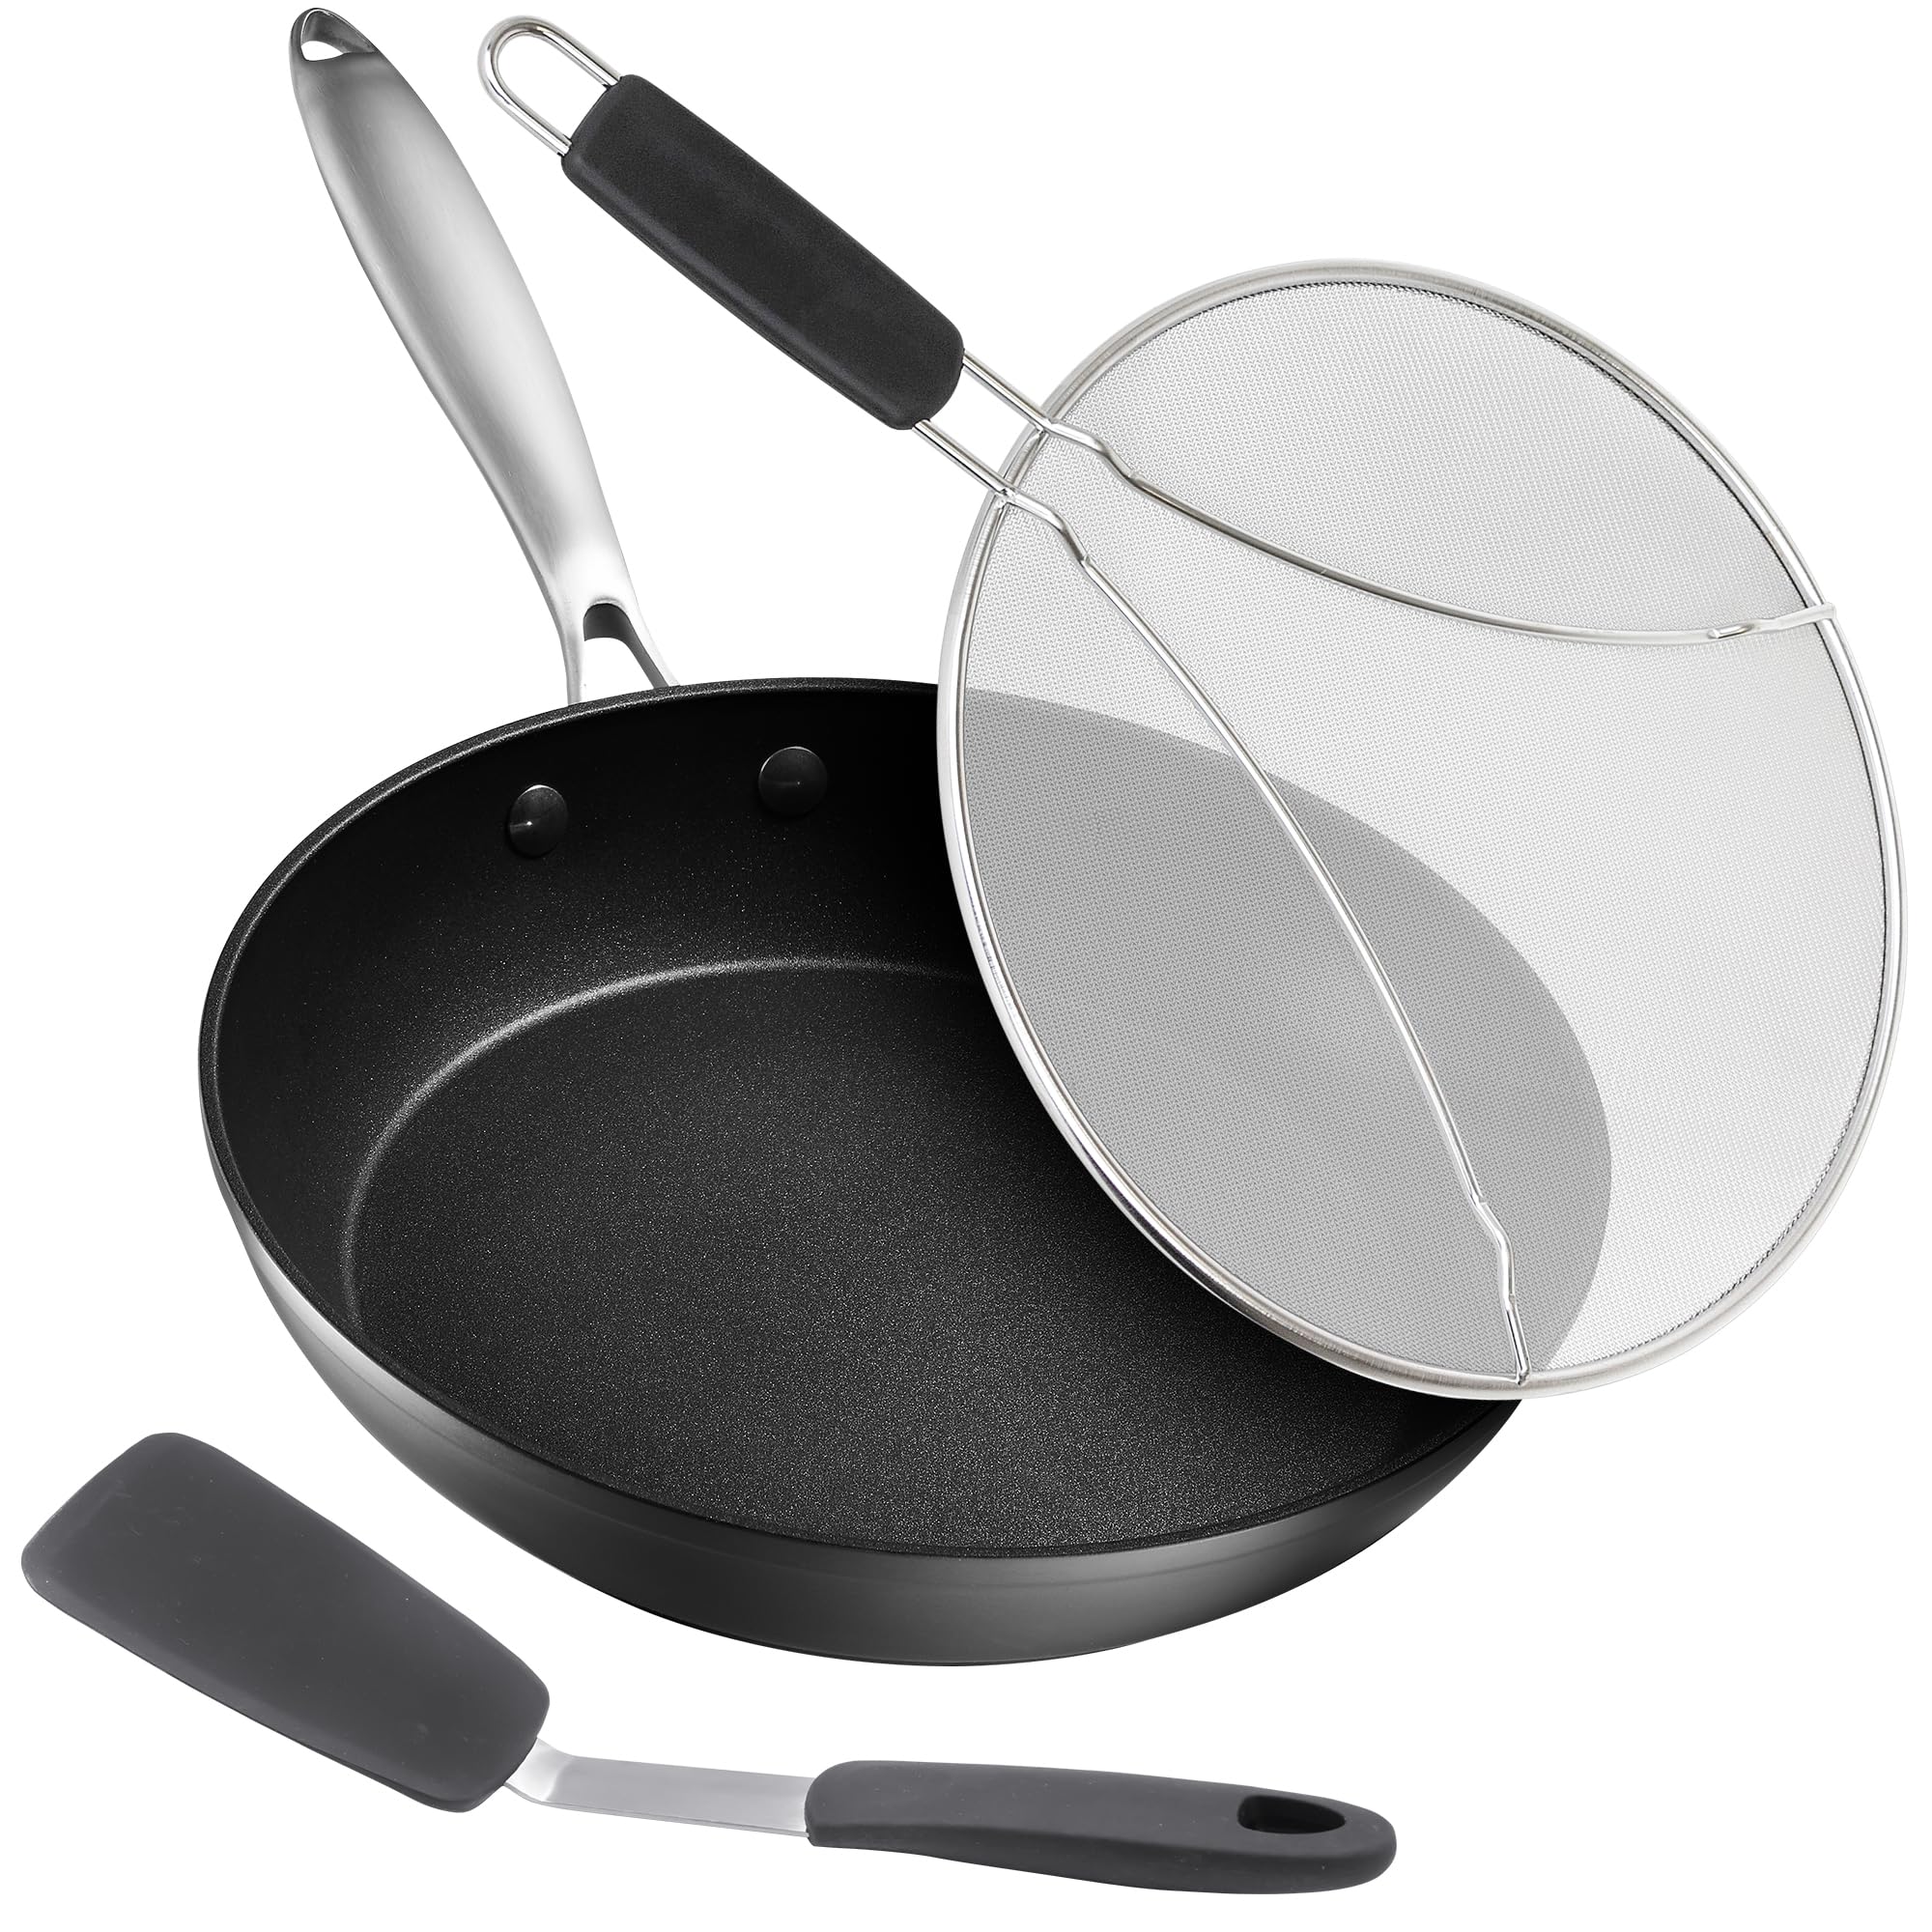 Belwares Nonstick Frying Pan - 10 Inch Non Stick Skillet Egg Frying Pan – Lightweight Aluminum Hard-Anodized Fry Pan for Kitchen Cooking with Gas, Electric, Oven or Induction  - Like New